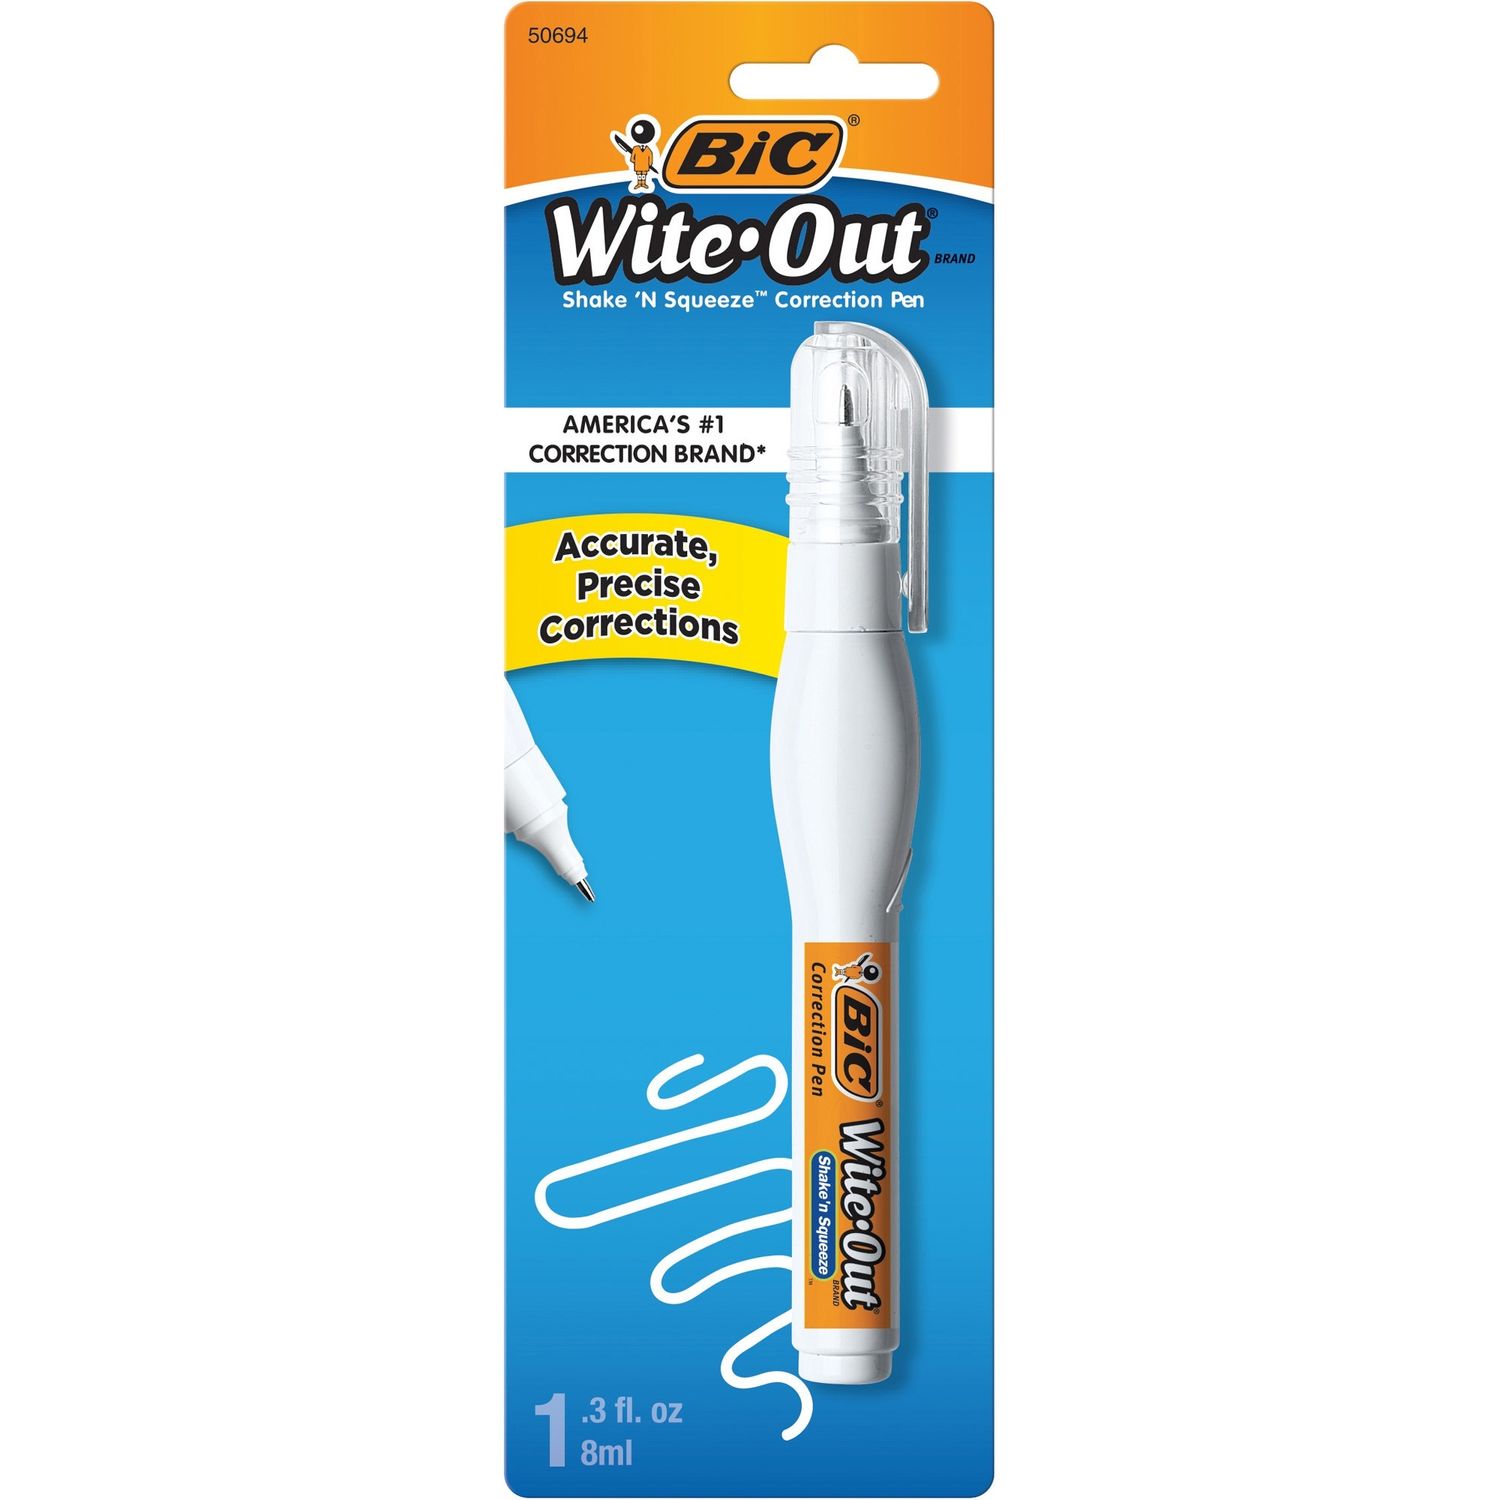 Wite-Out Shake 'N Squeeze Correction Pen Tip Applicator, 8 mL, White, 1 / Pack